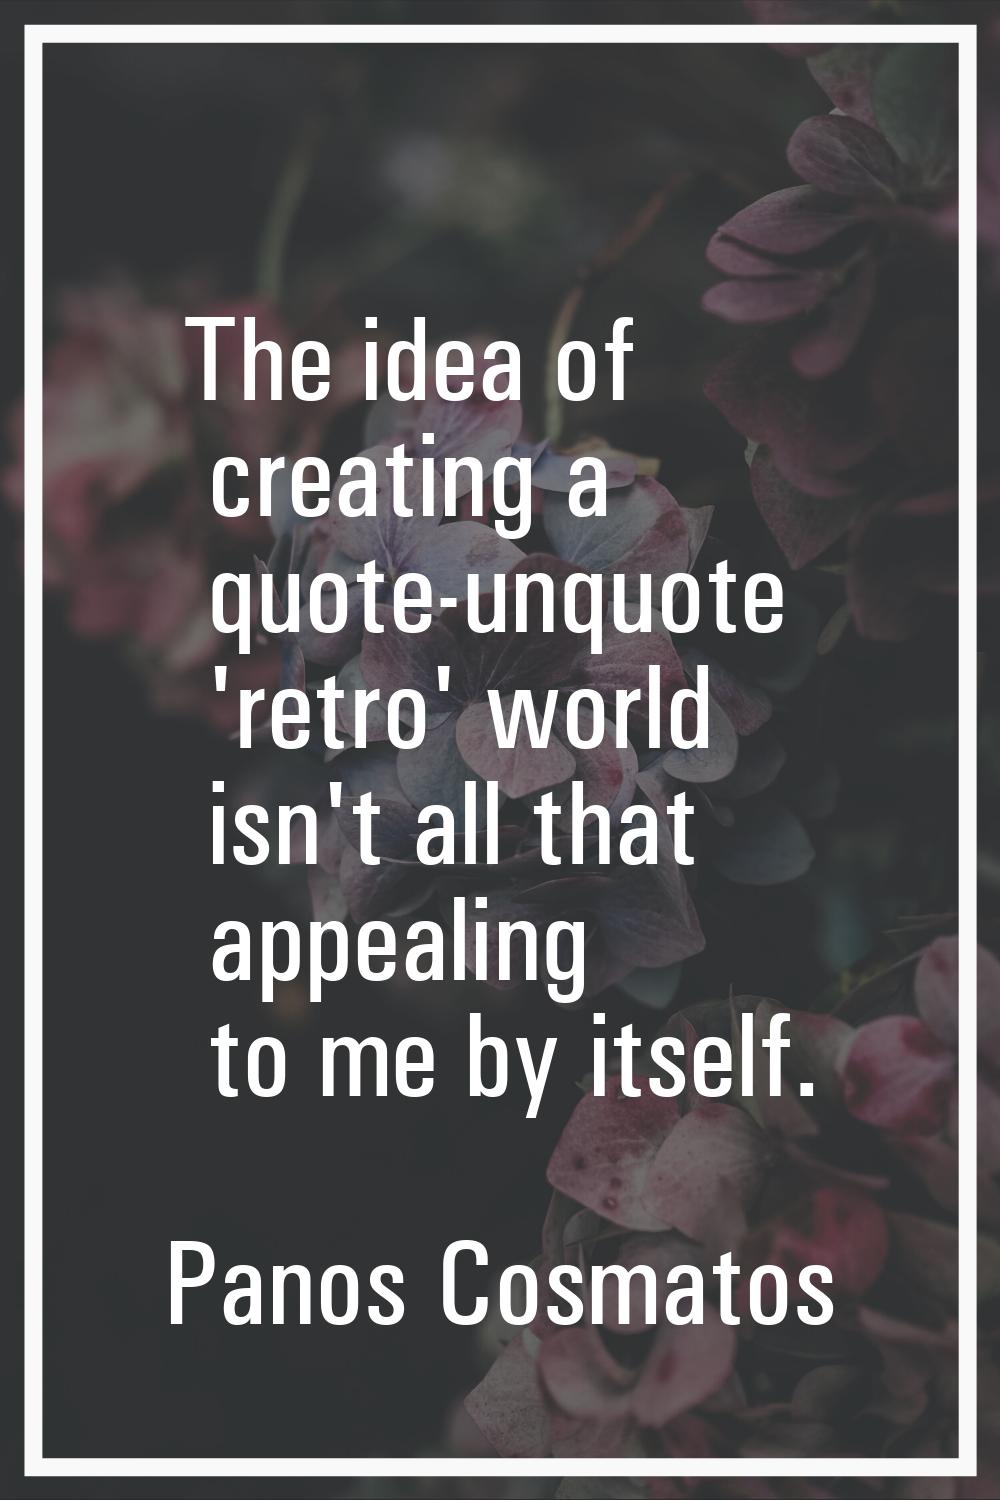 The idea of creating a quote-unquote 'retro' world isn't all that appealing to me by itself.